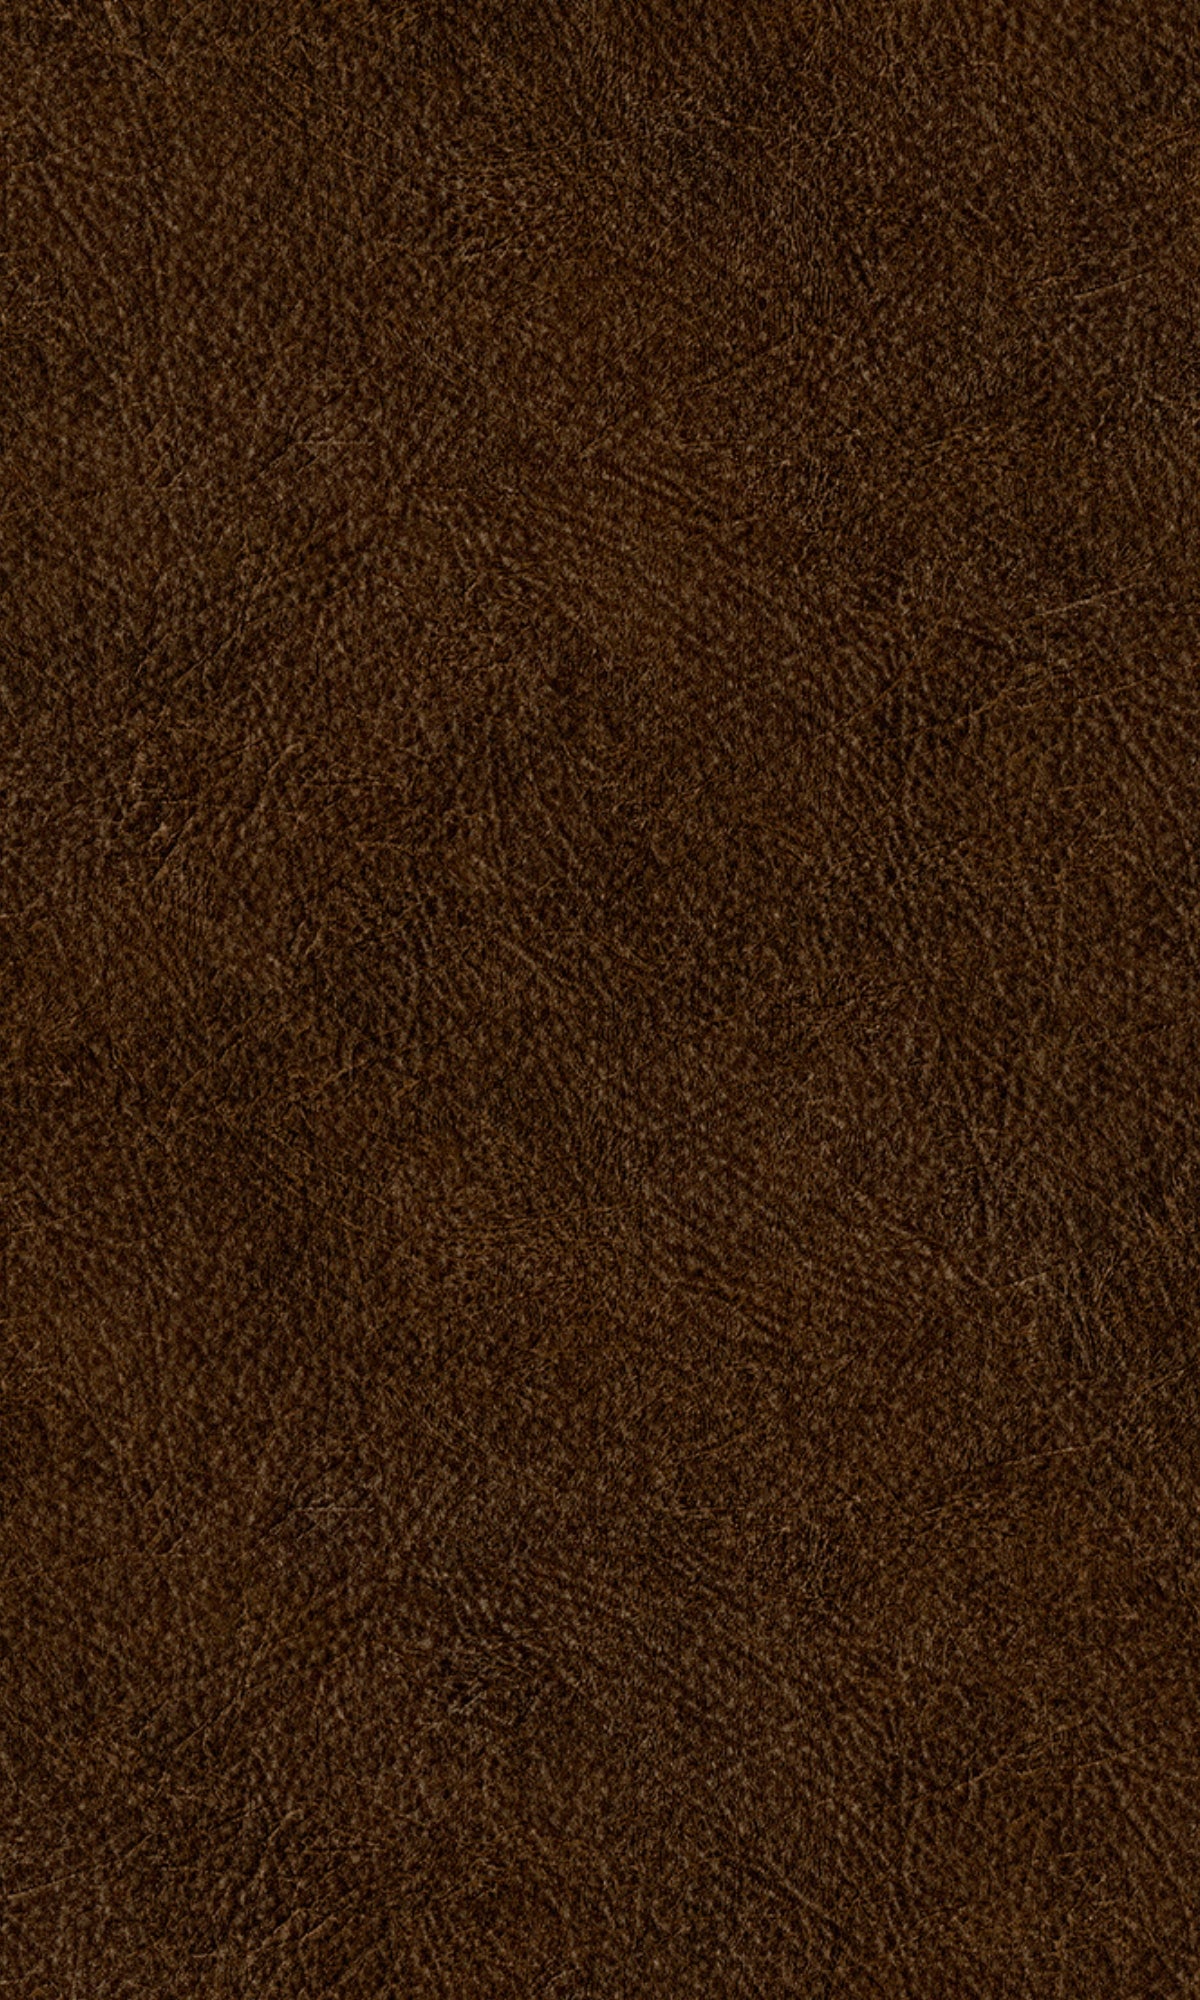 Brown Plain Leather Textured Wallpaper R8217